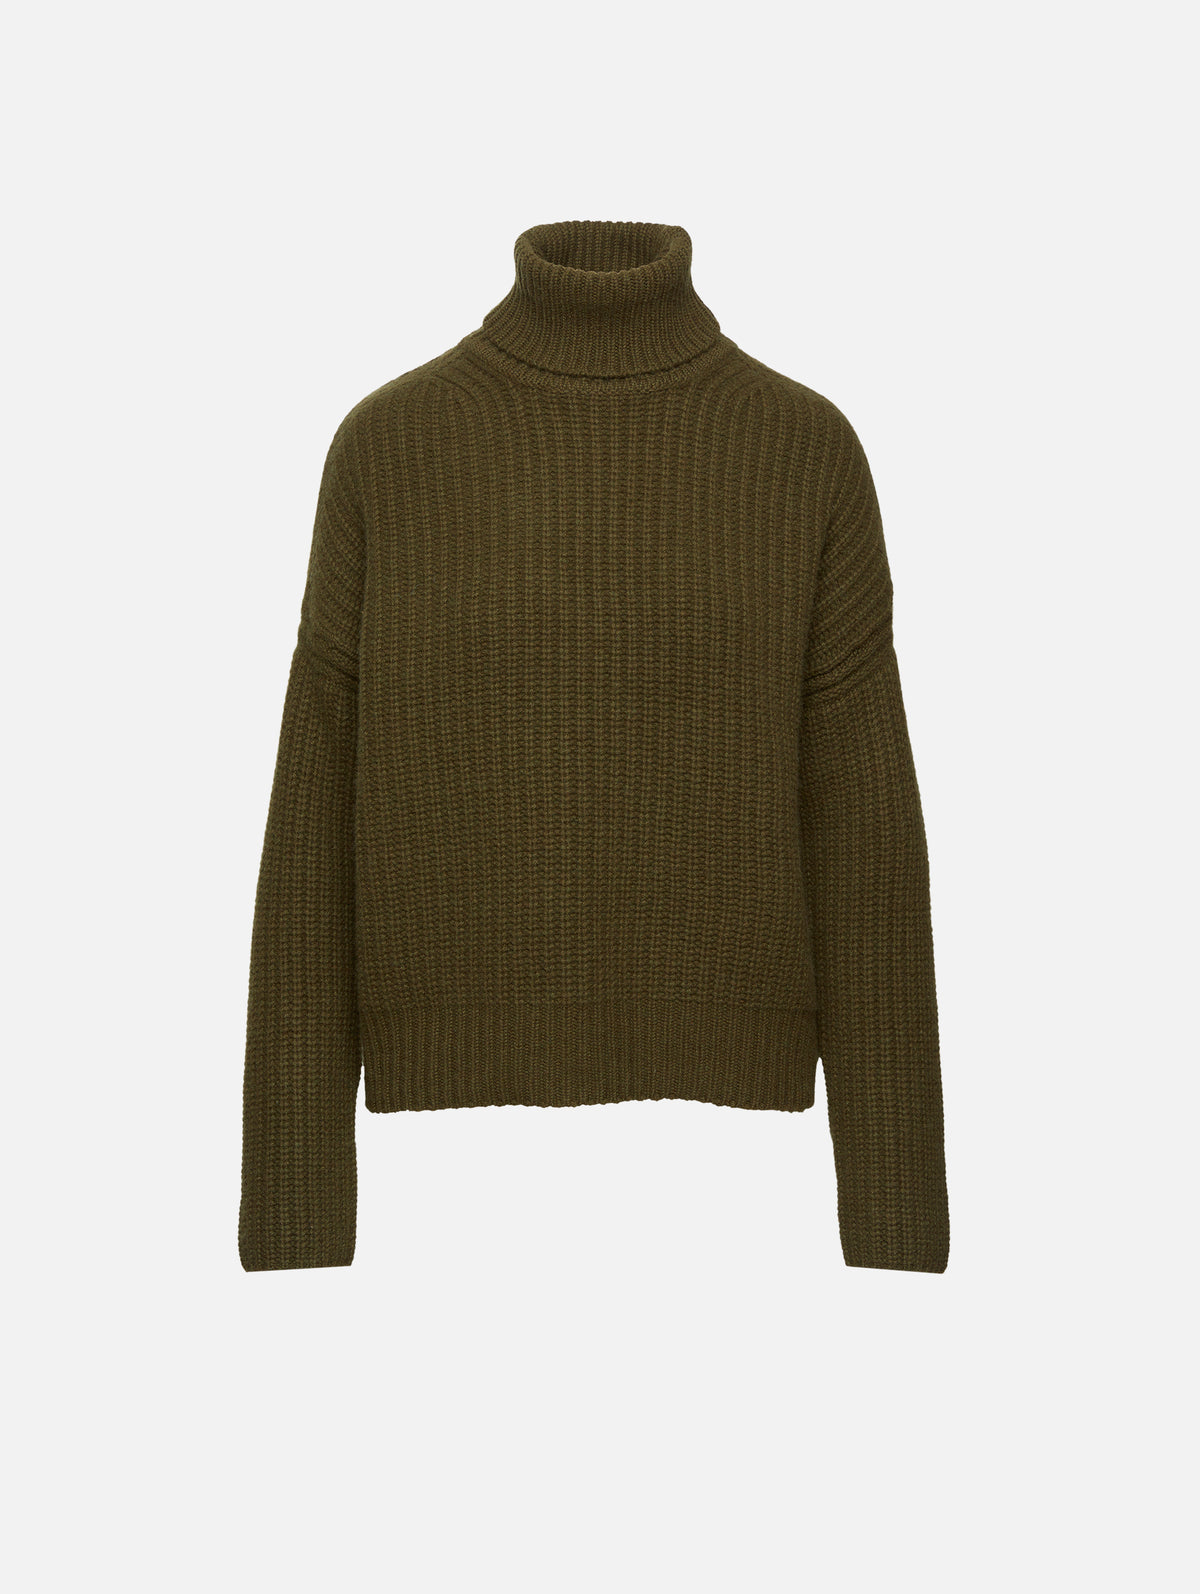 view 1 - Toujours Turtleneck Top